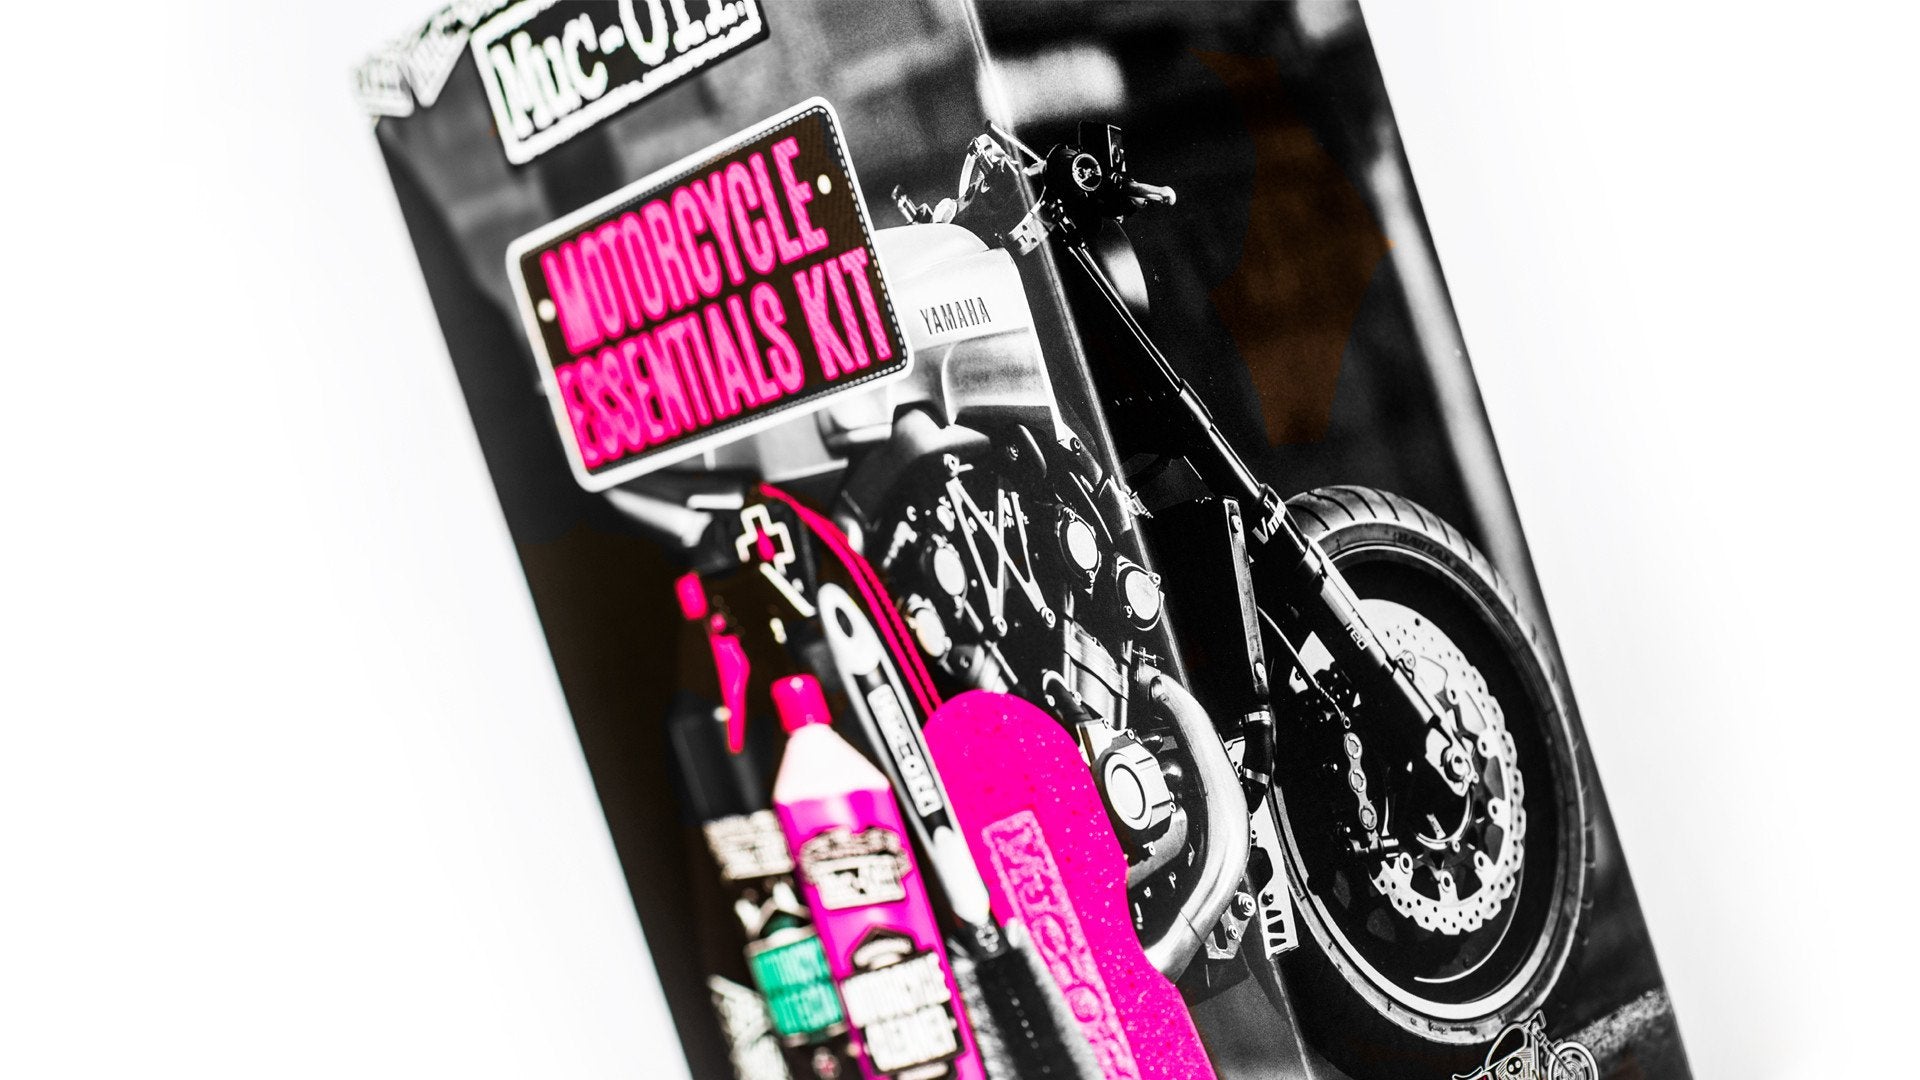 Muc-off motorcycle care essential kit